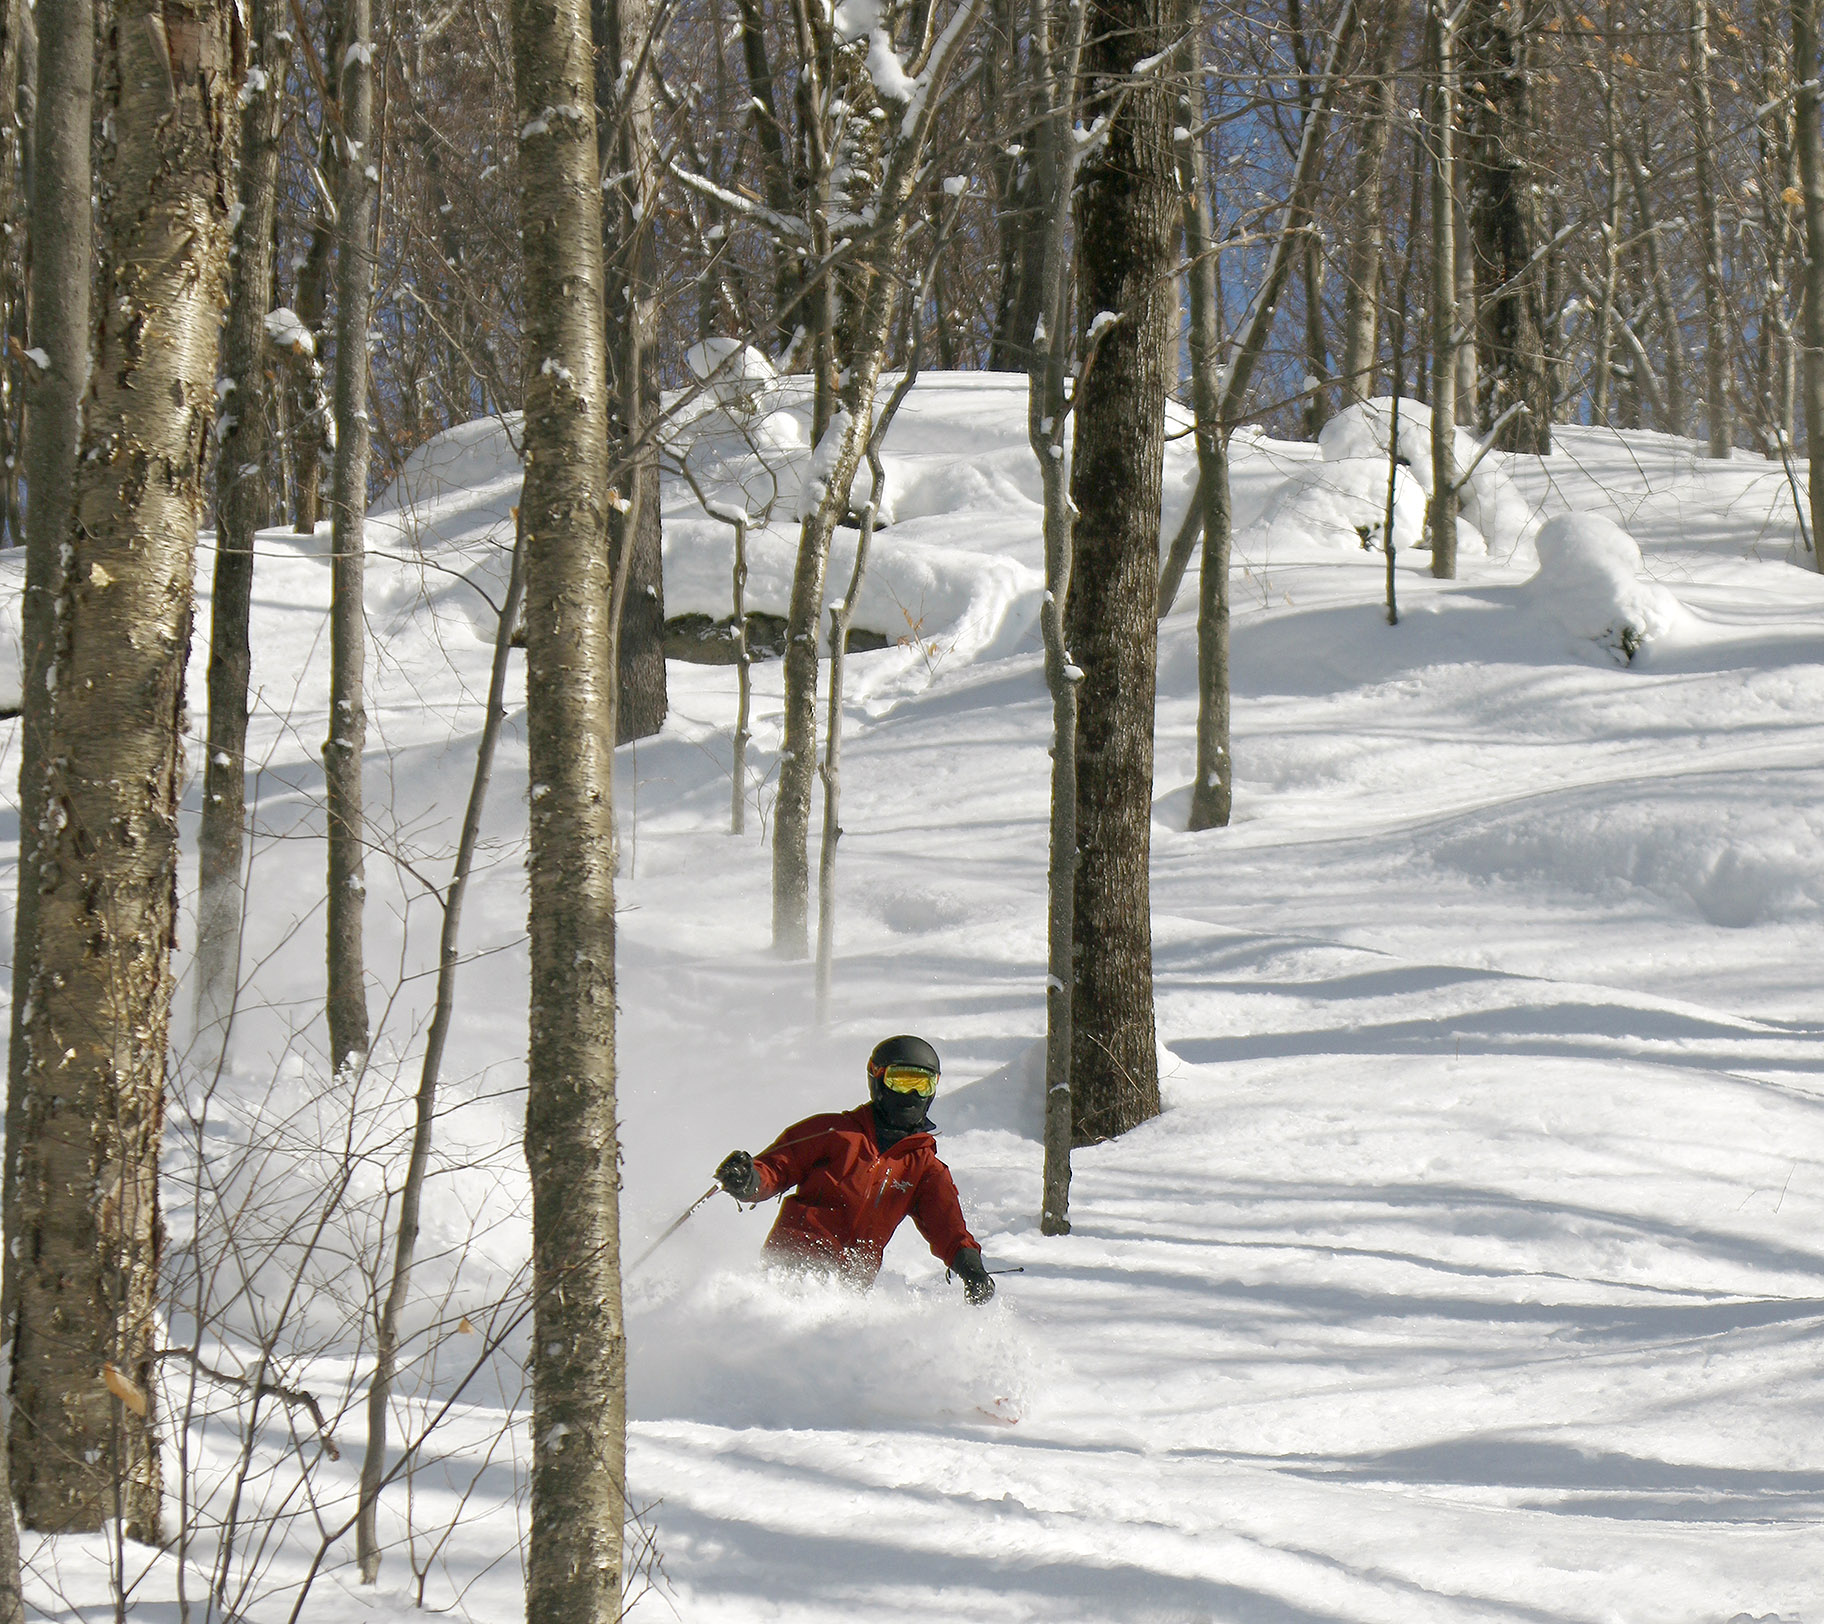 An image of Dylan skiing powder in some open trees at Bolton Valley Ski Resort in Vermont